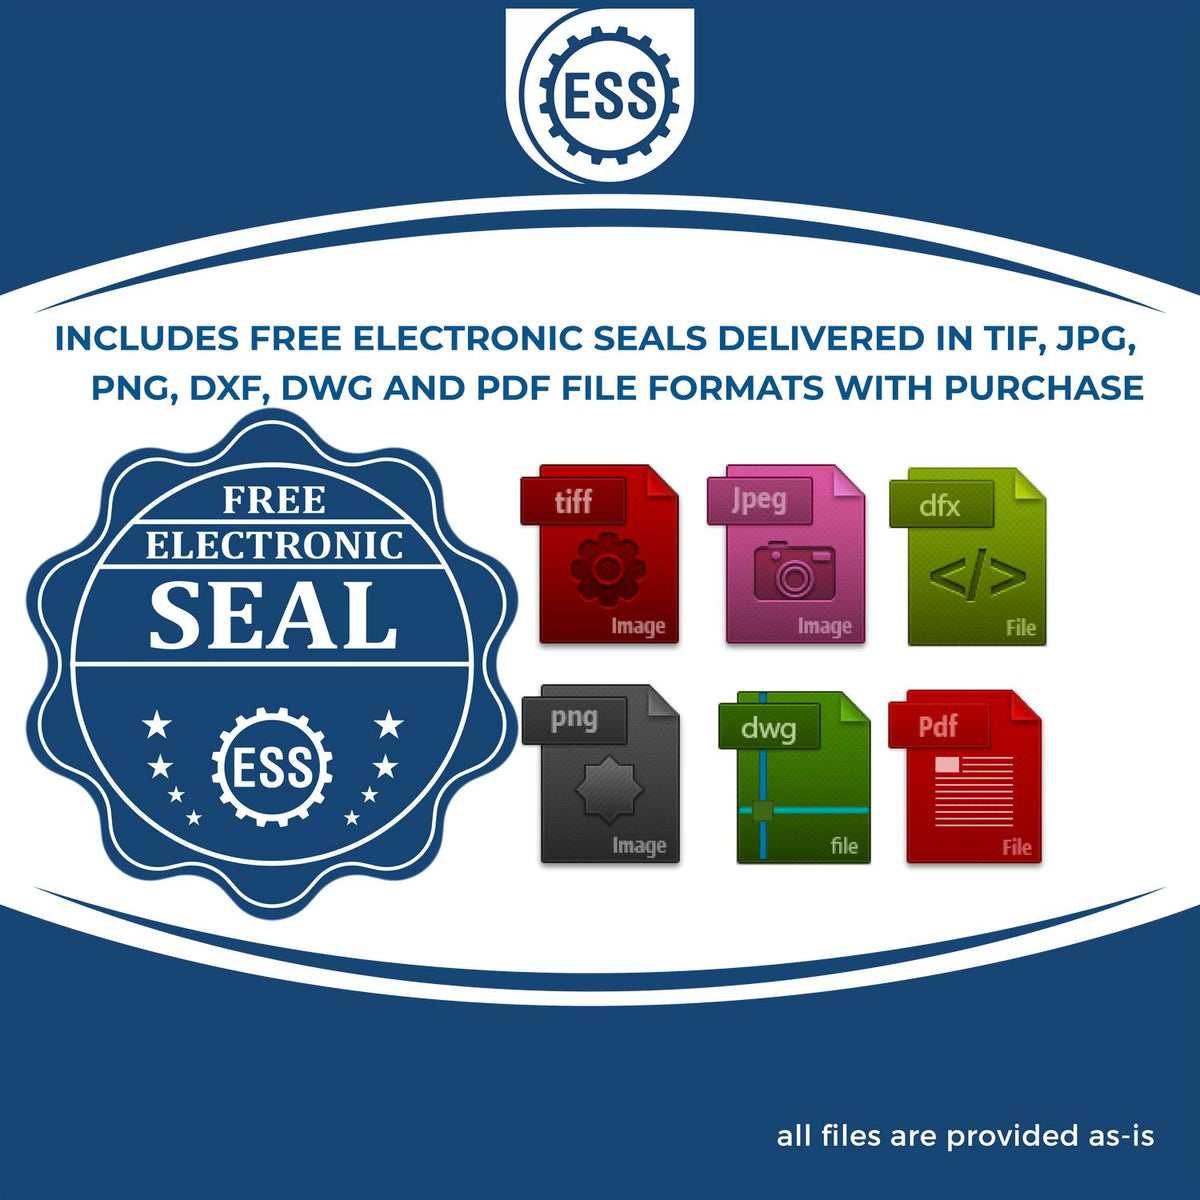 An infographic for the free electronic seal for the Premium MaxLight Pre-Inked Connecticut Landscape Architectural Stamp illustrating the different file type icons such as DXF, DWG, TIF, JPG and PNG.